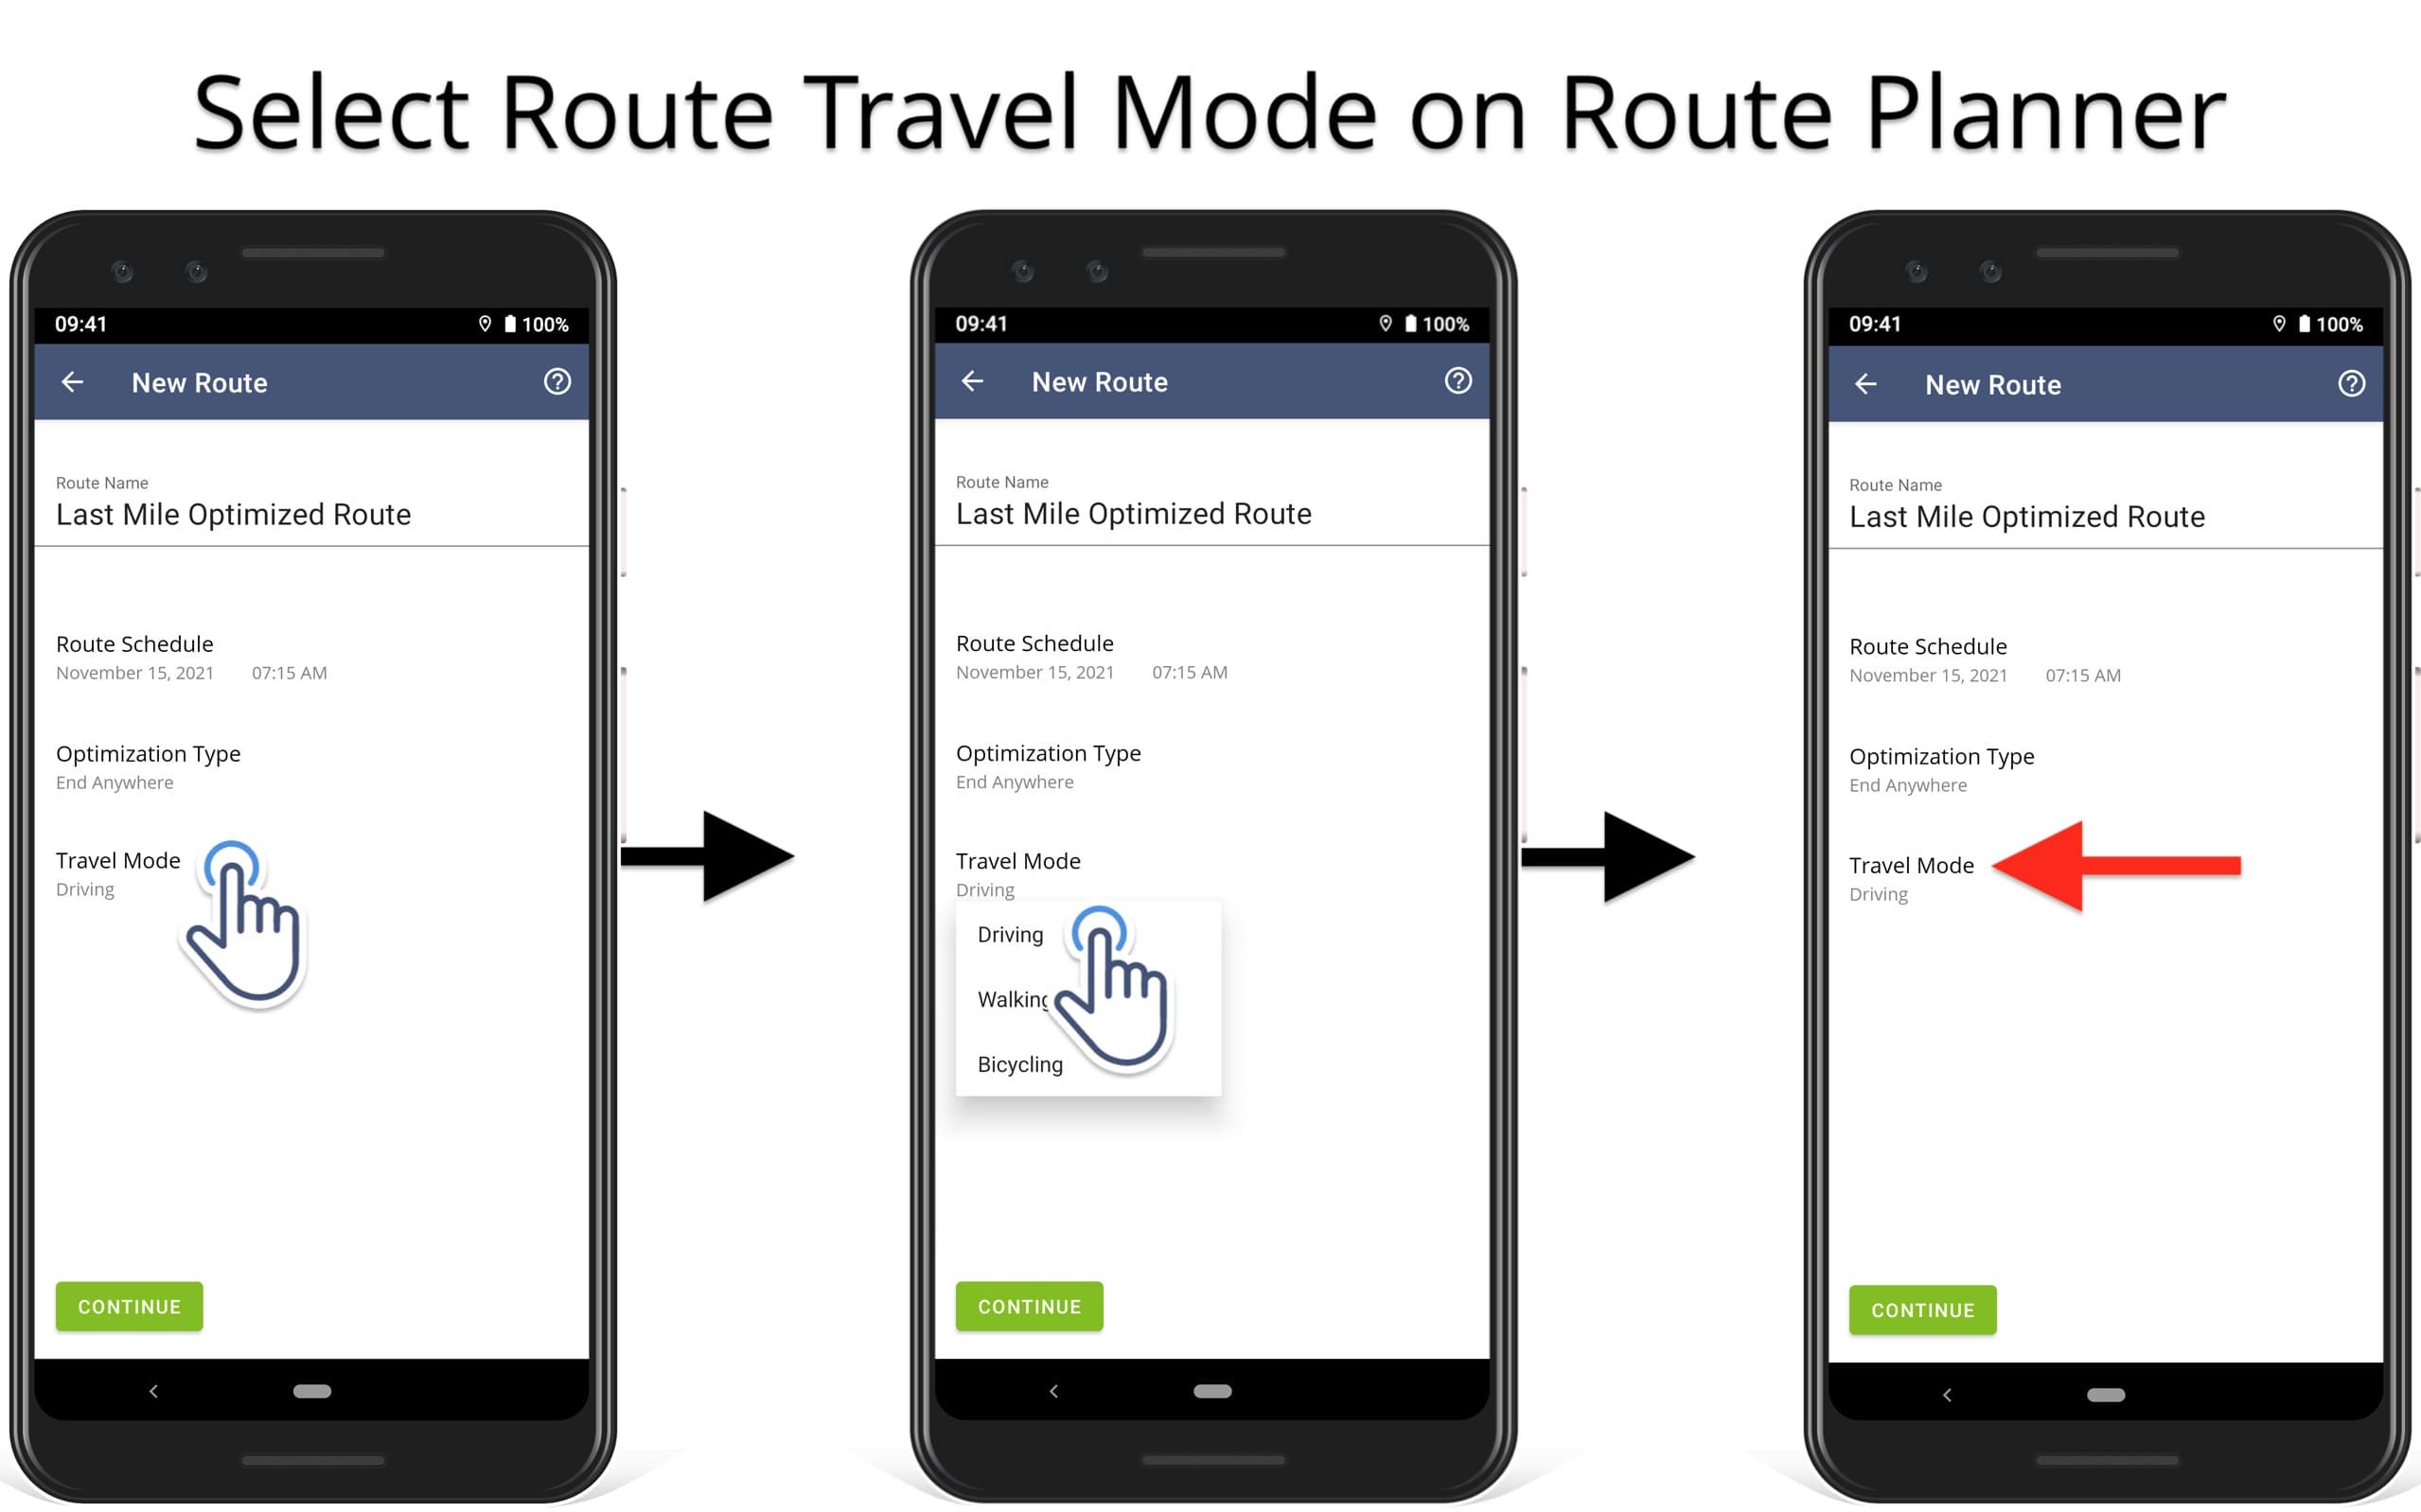 Select-route-travel-mode-on-route-planner